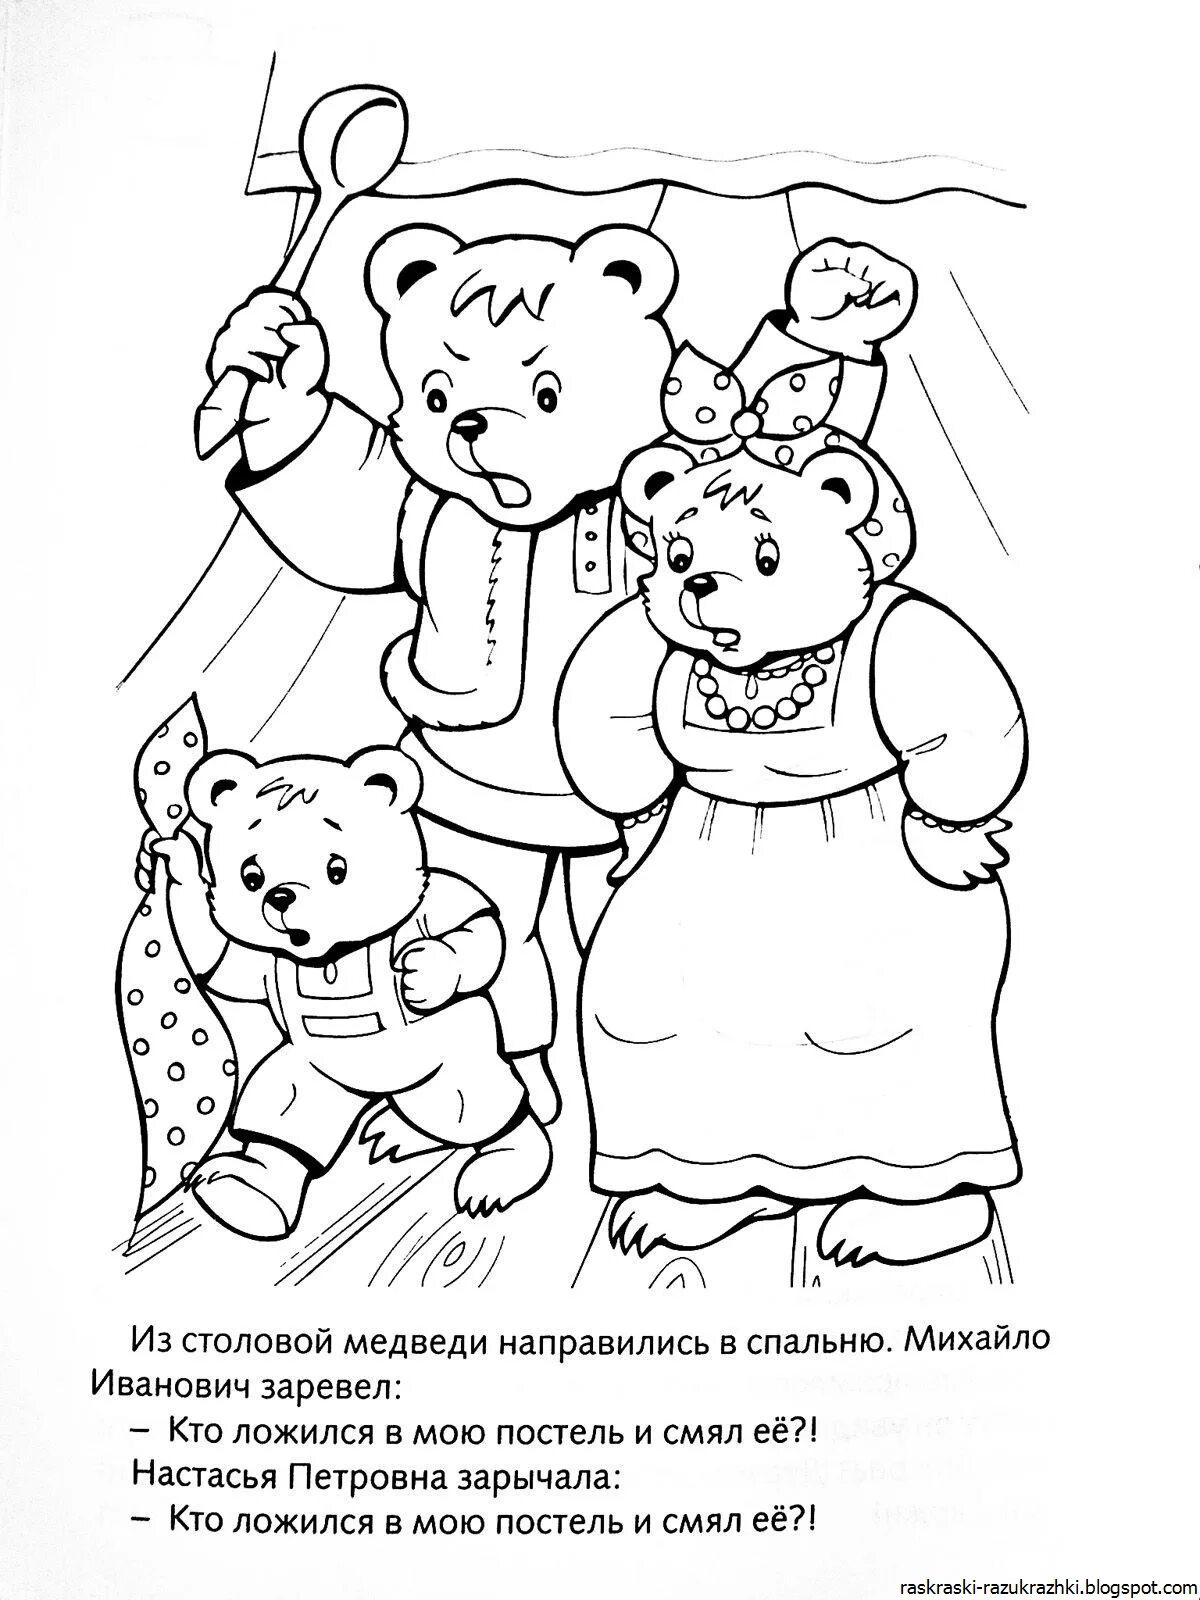 Enchanting coloring pages heroes of fairy tales